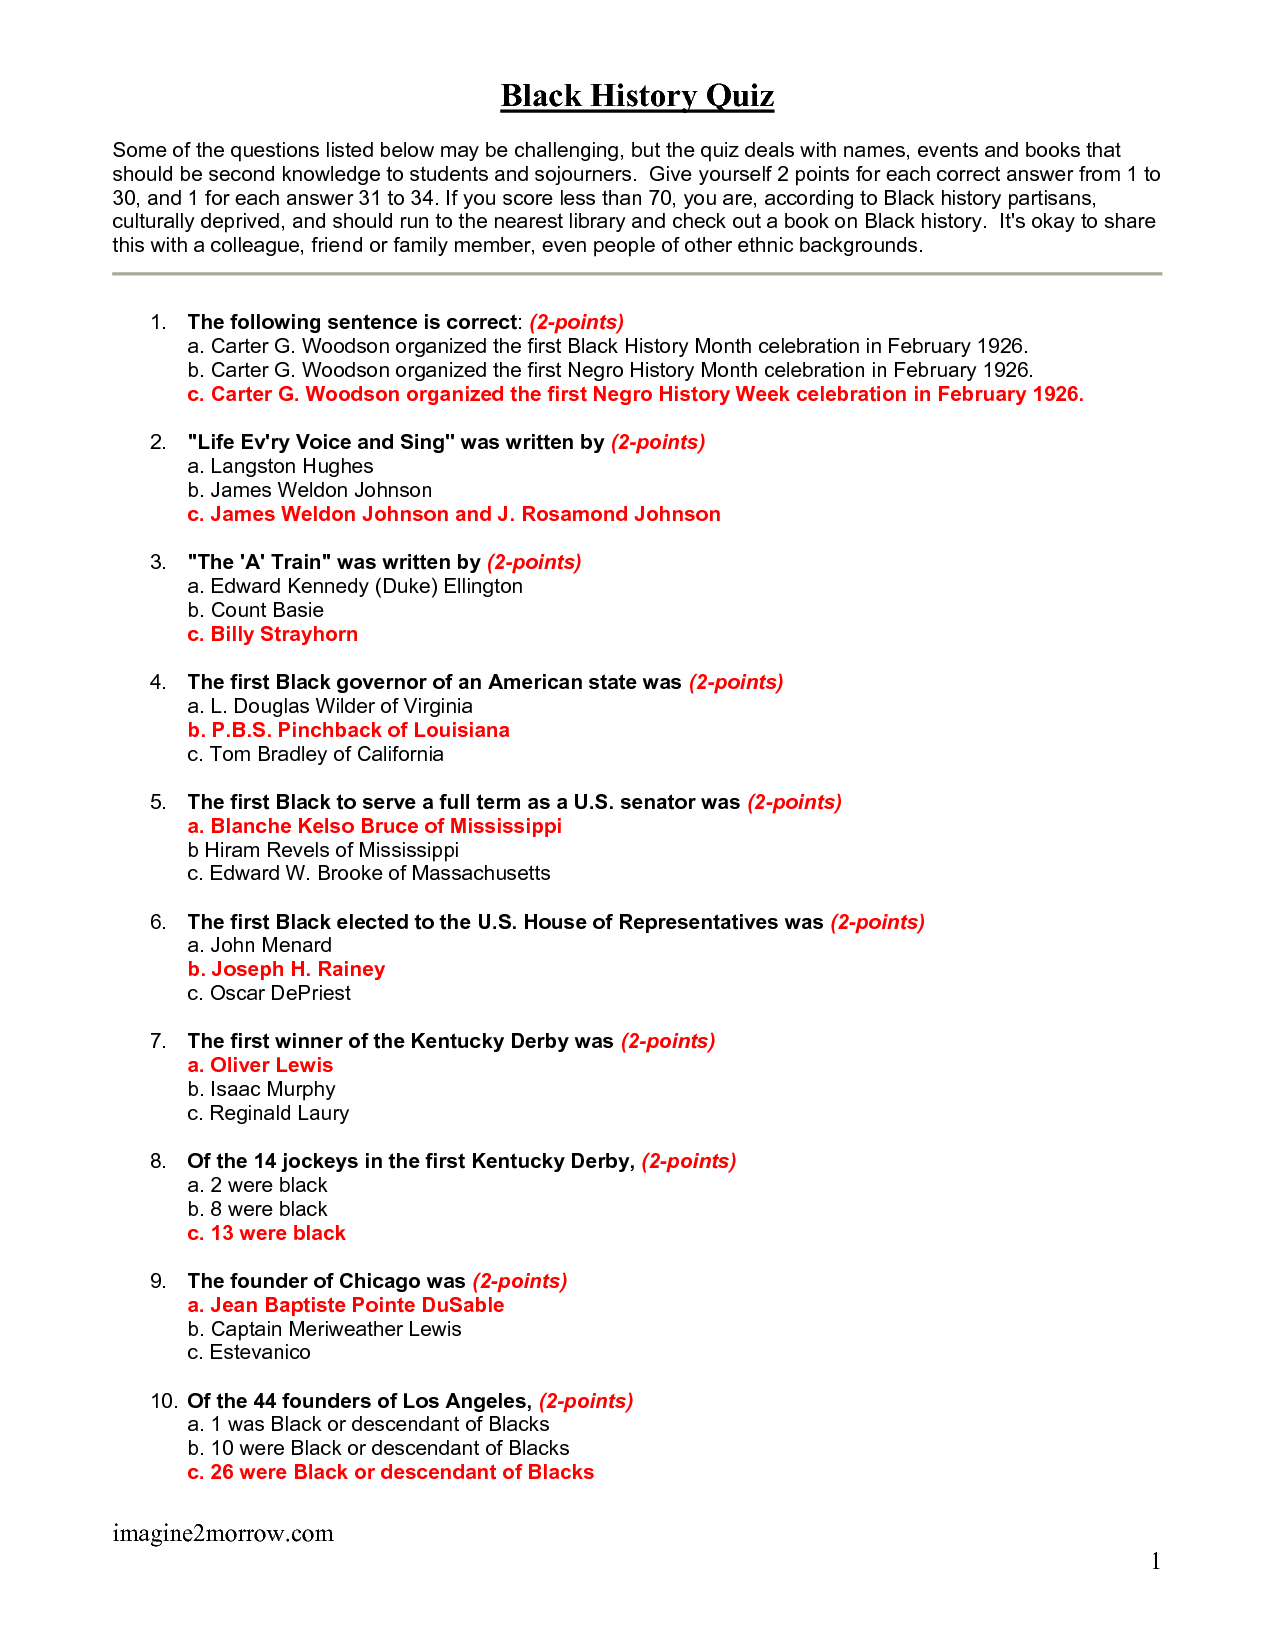 Black History Quiz Questions And Answers Printable That Are Universal 